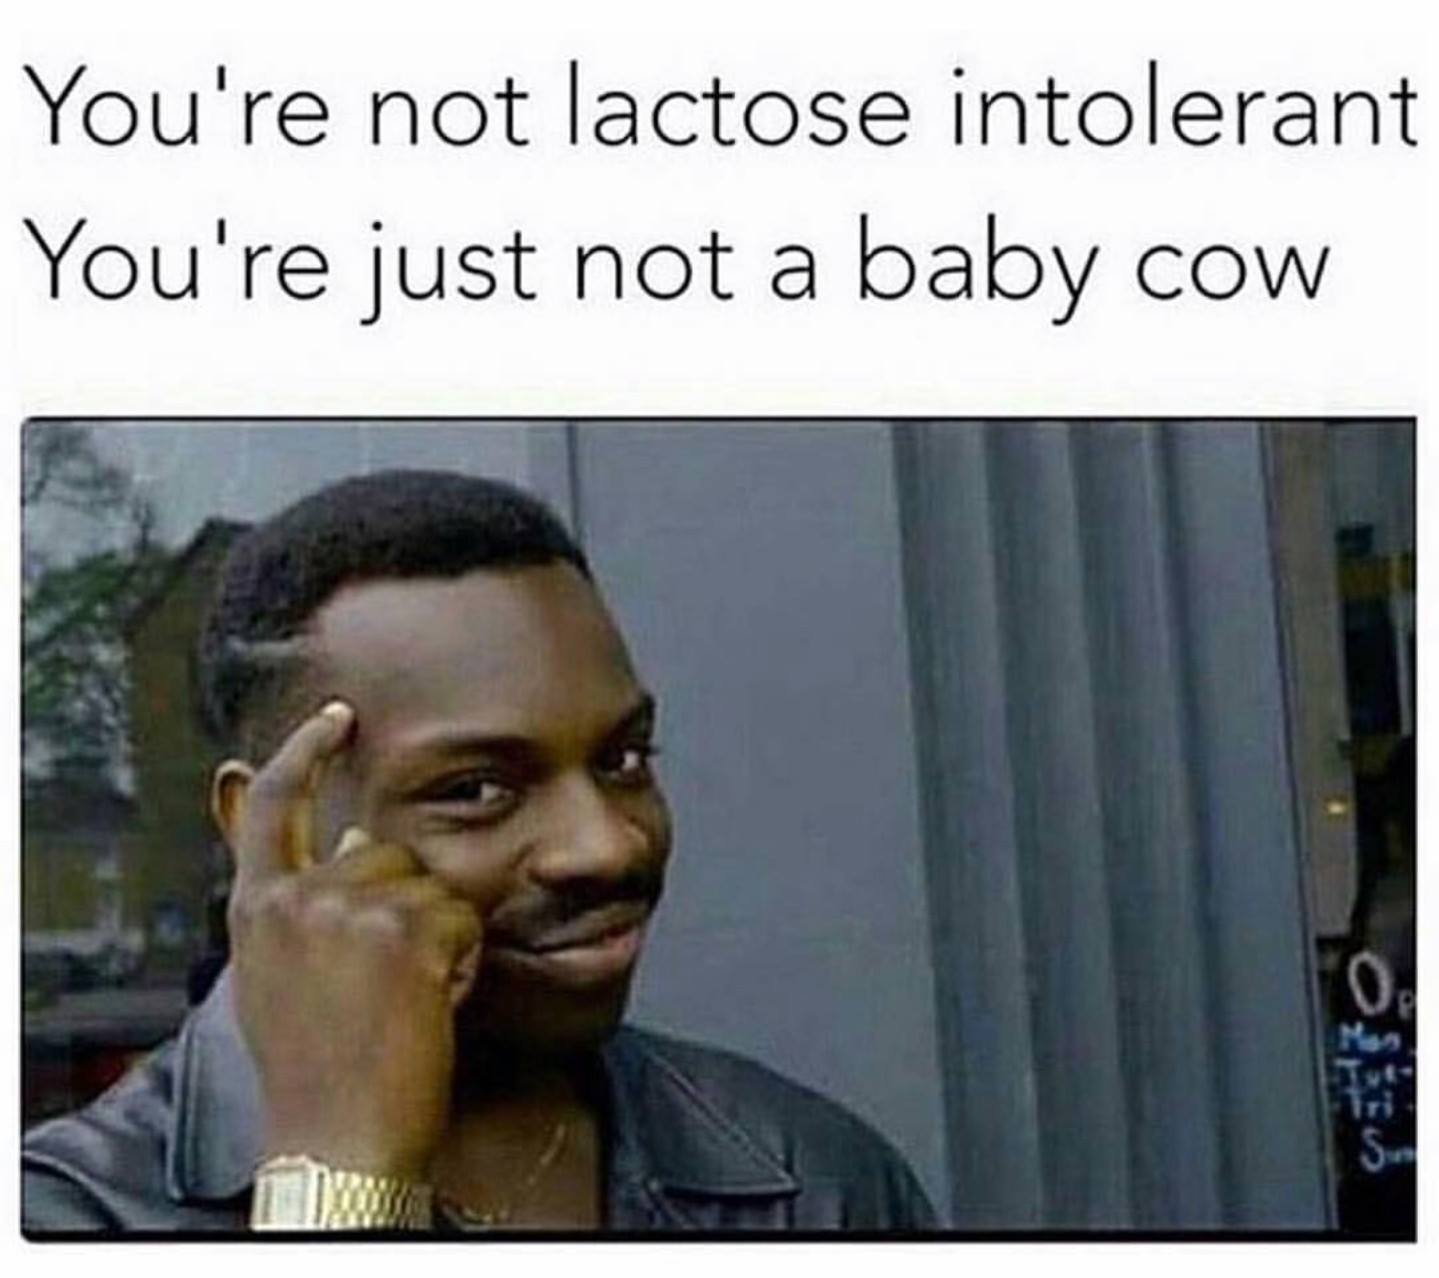 you're not lactose intolerant, you're just not a baby cow